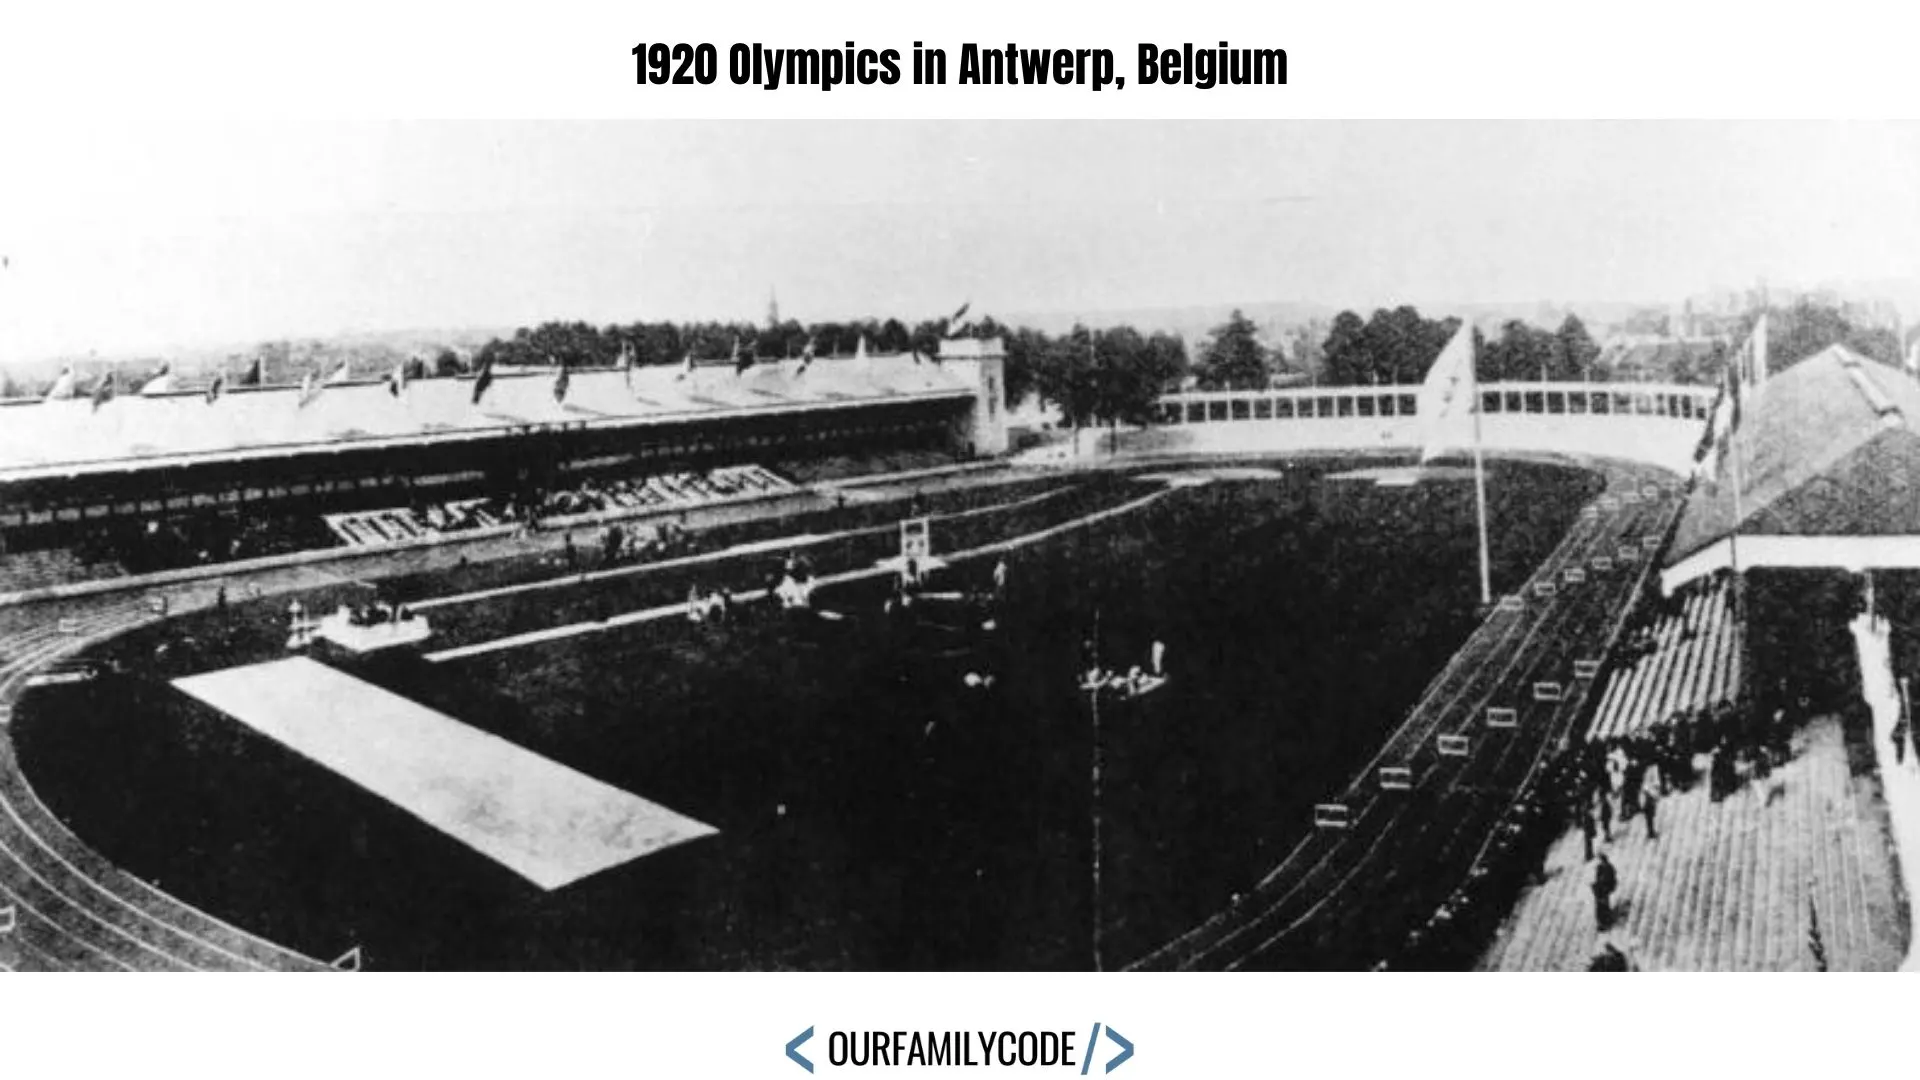 A picture of Olympisch Stadion from the 1920 Olympic Games in Antwerp, Belgium.